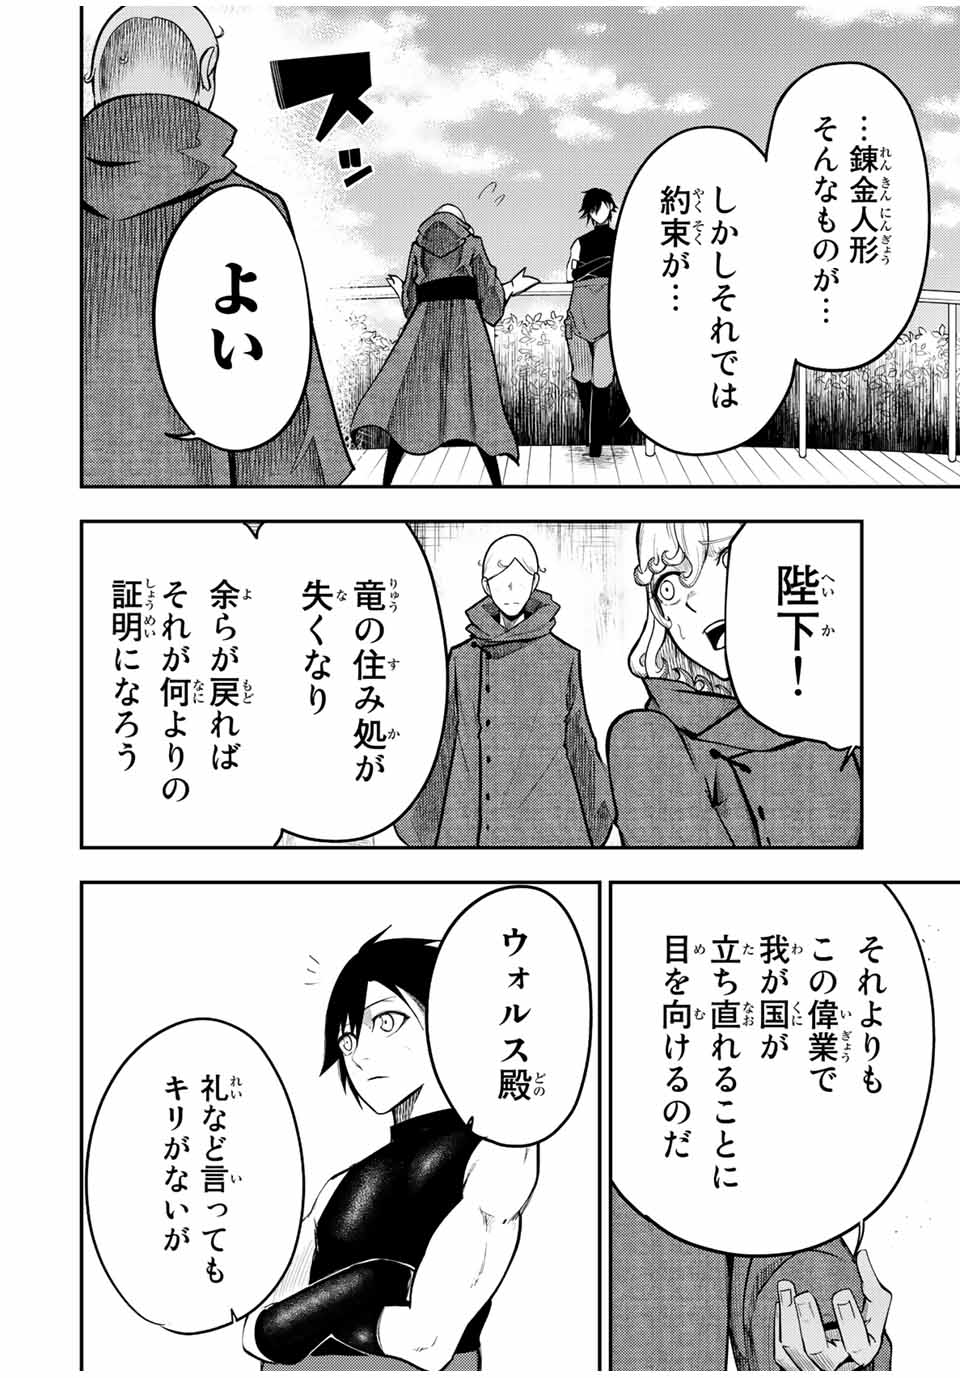 the strongest former prince-; 奴隷転生 ～その奴隷、最強の元王子につき～ 第65話 - Page 16